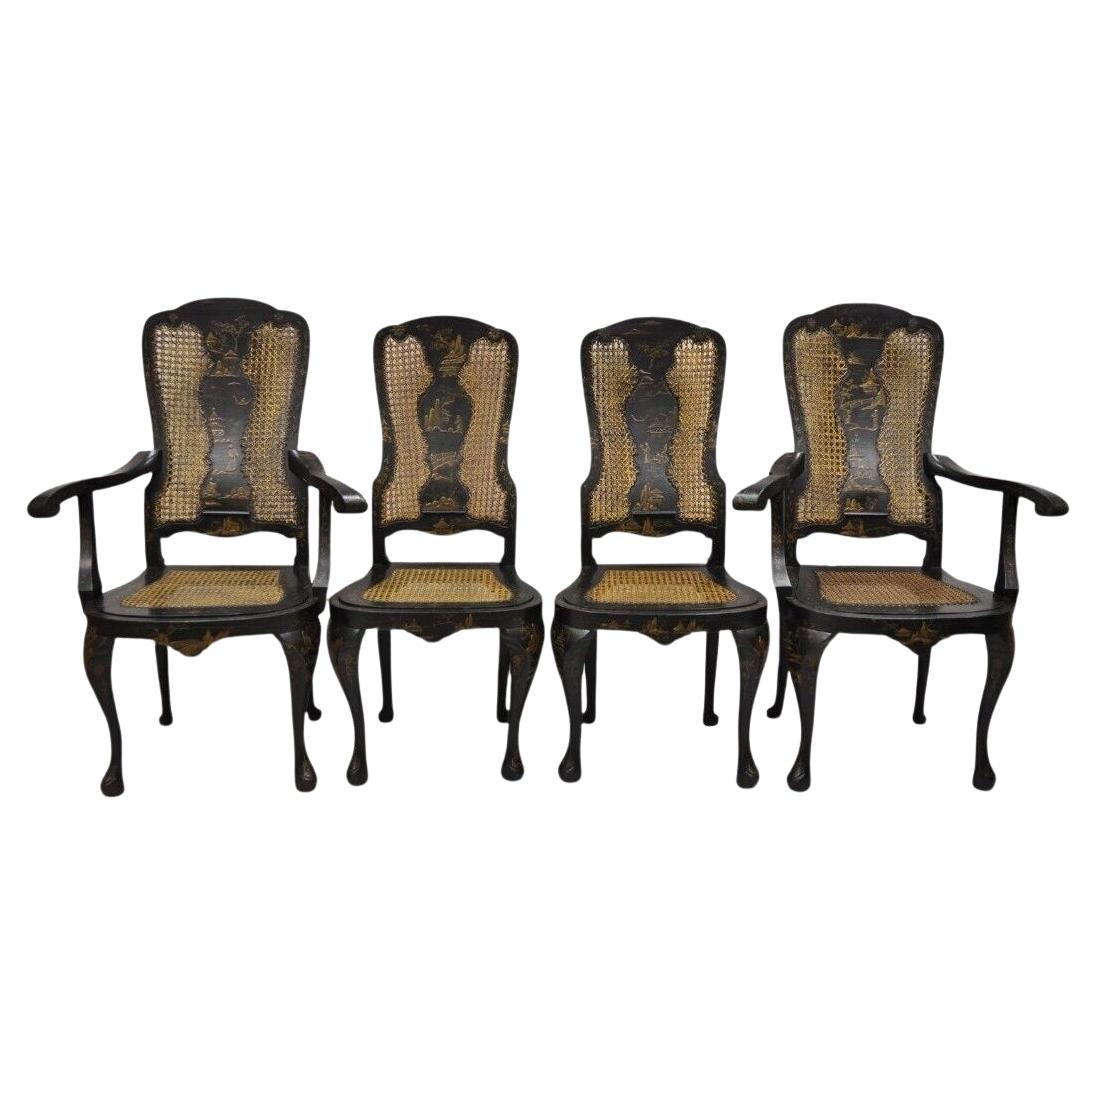 Antique Chinoiserie Queen Anne Hand Painted Floral Cane Dining Chairs - Set of 4 For Sale